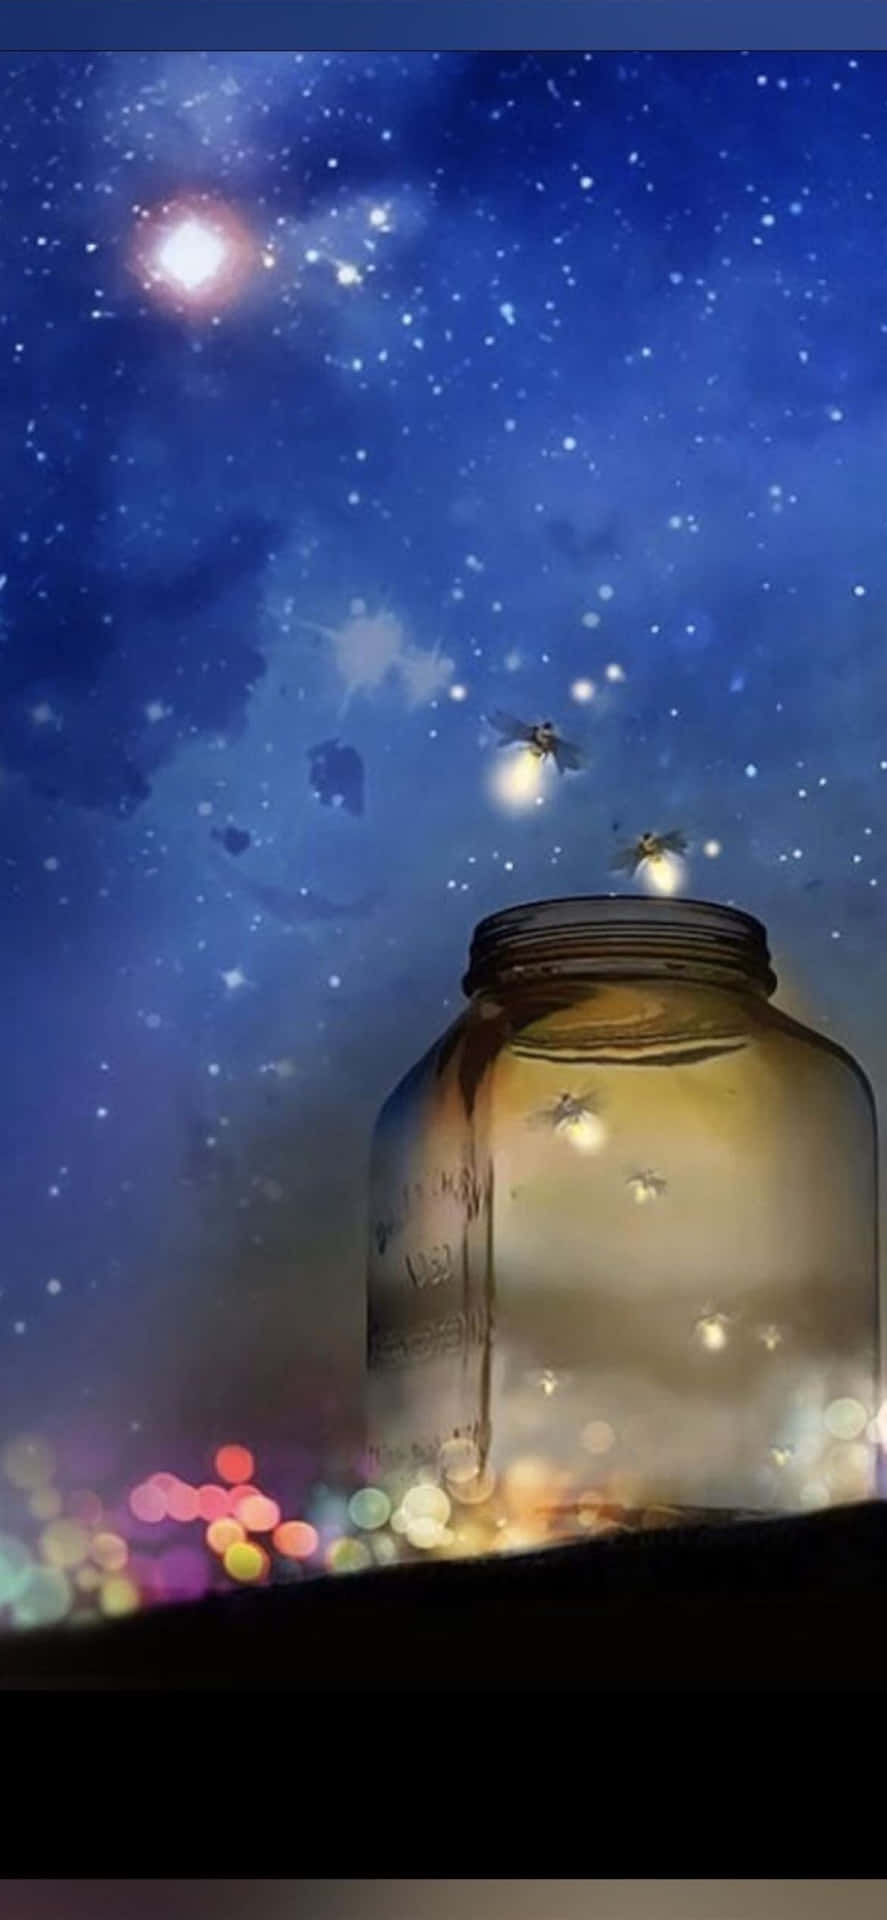 "The brilliance of fireflies lighting up the night."